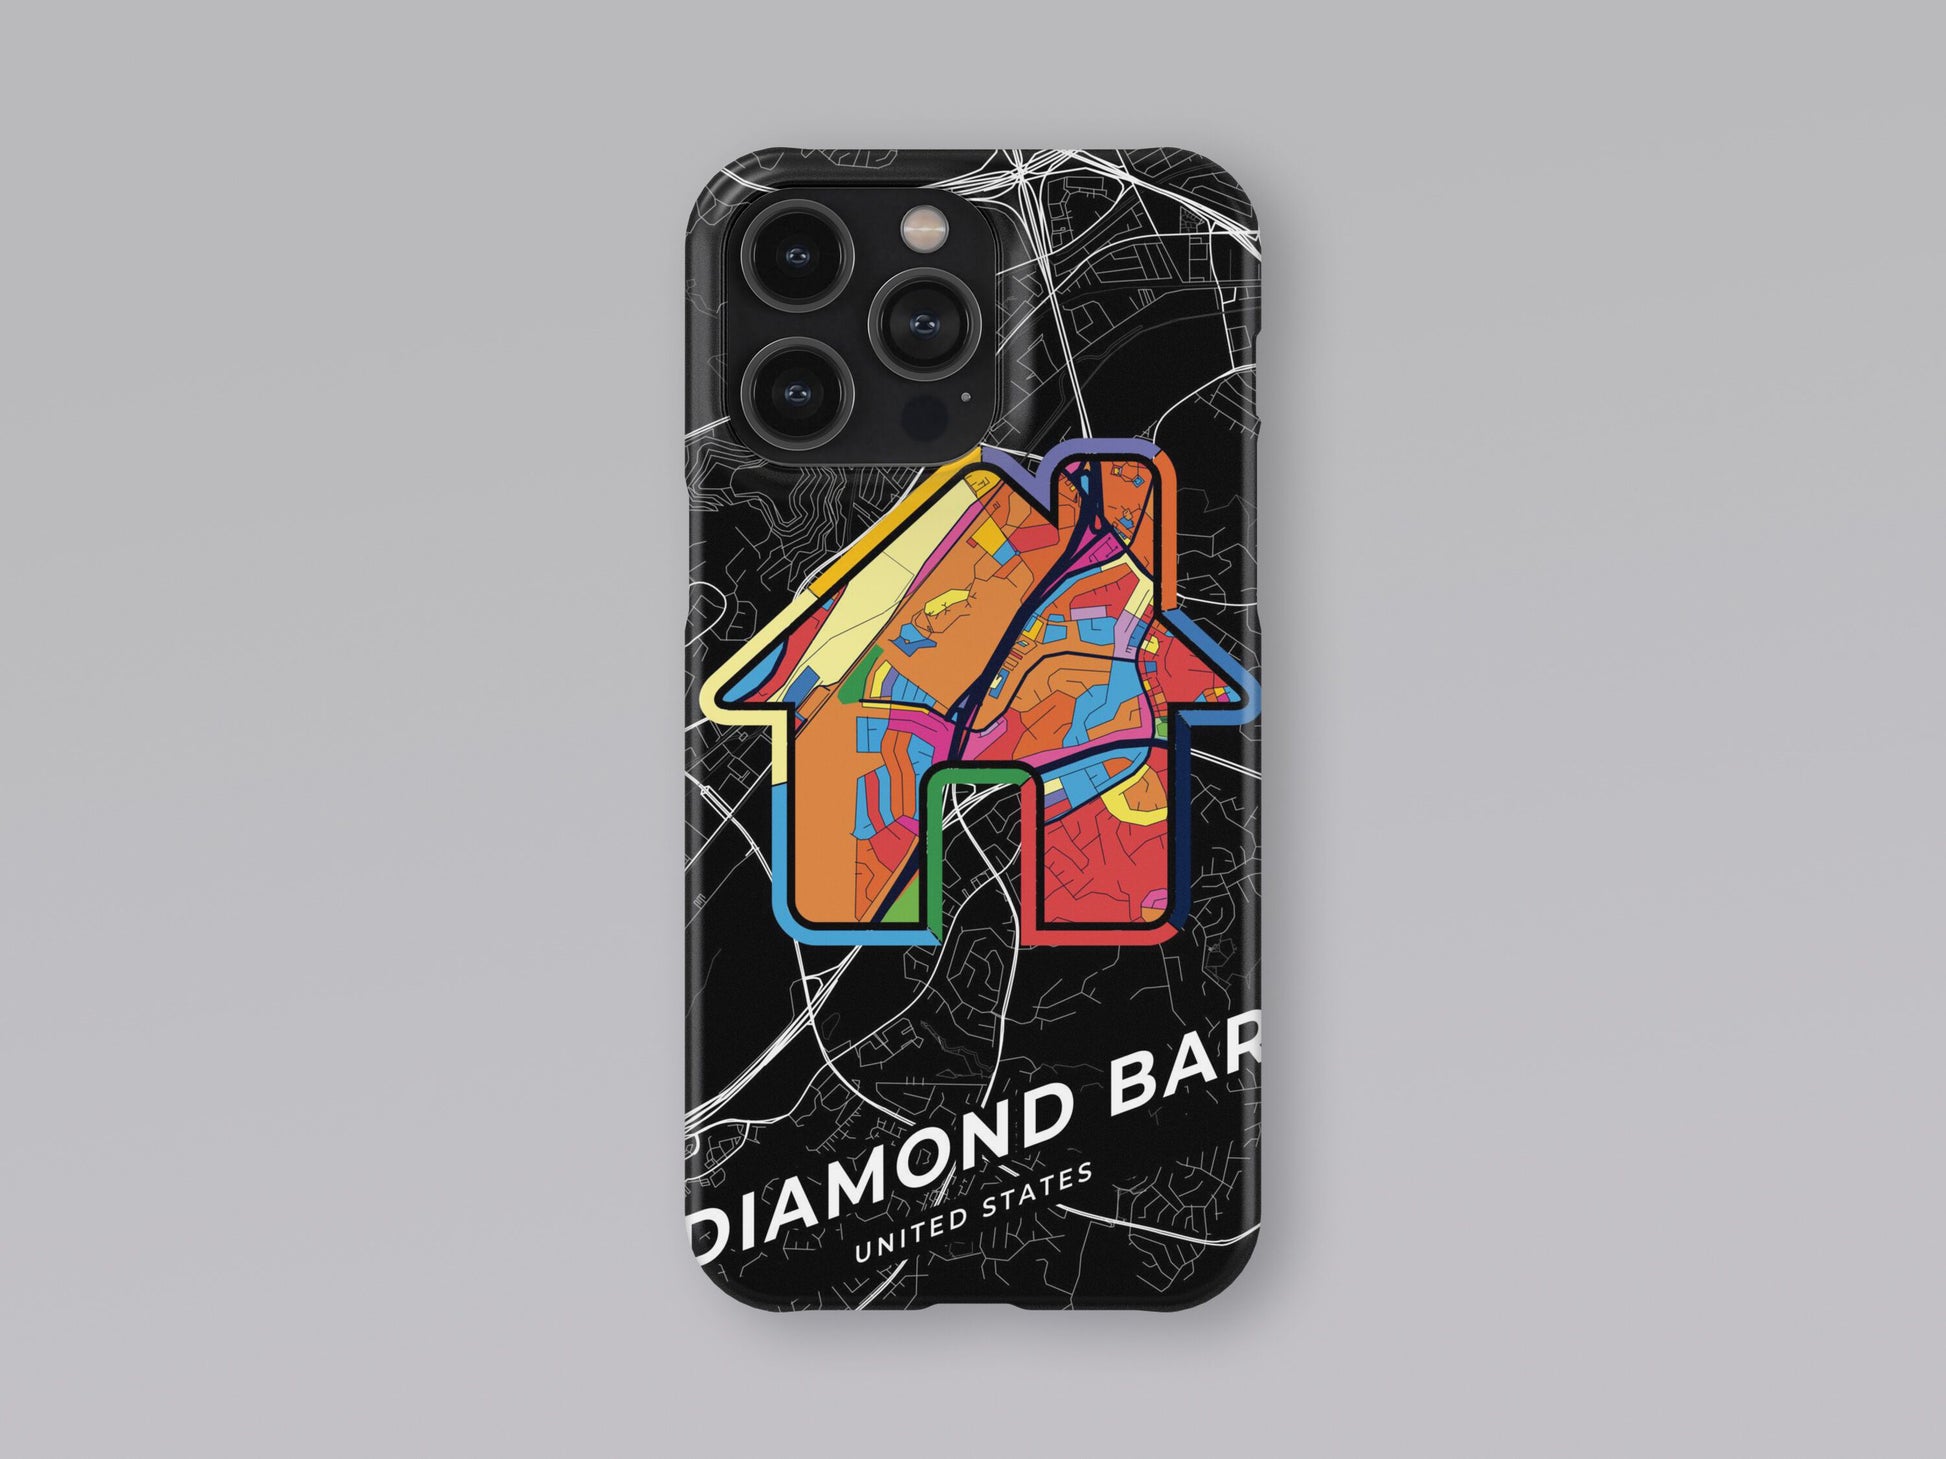 Diamond Bar California slim phone case with colorful icon. Birthday, wedding or housewarming gift. Couple match cases. 3